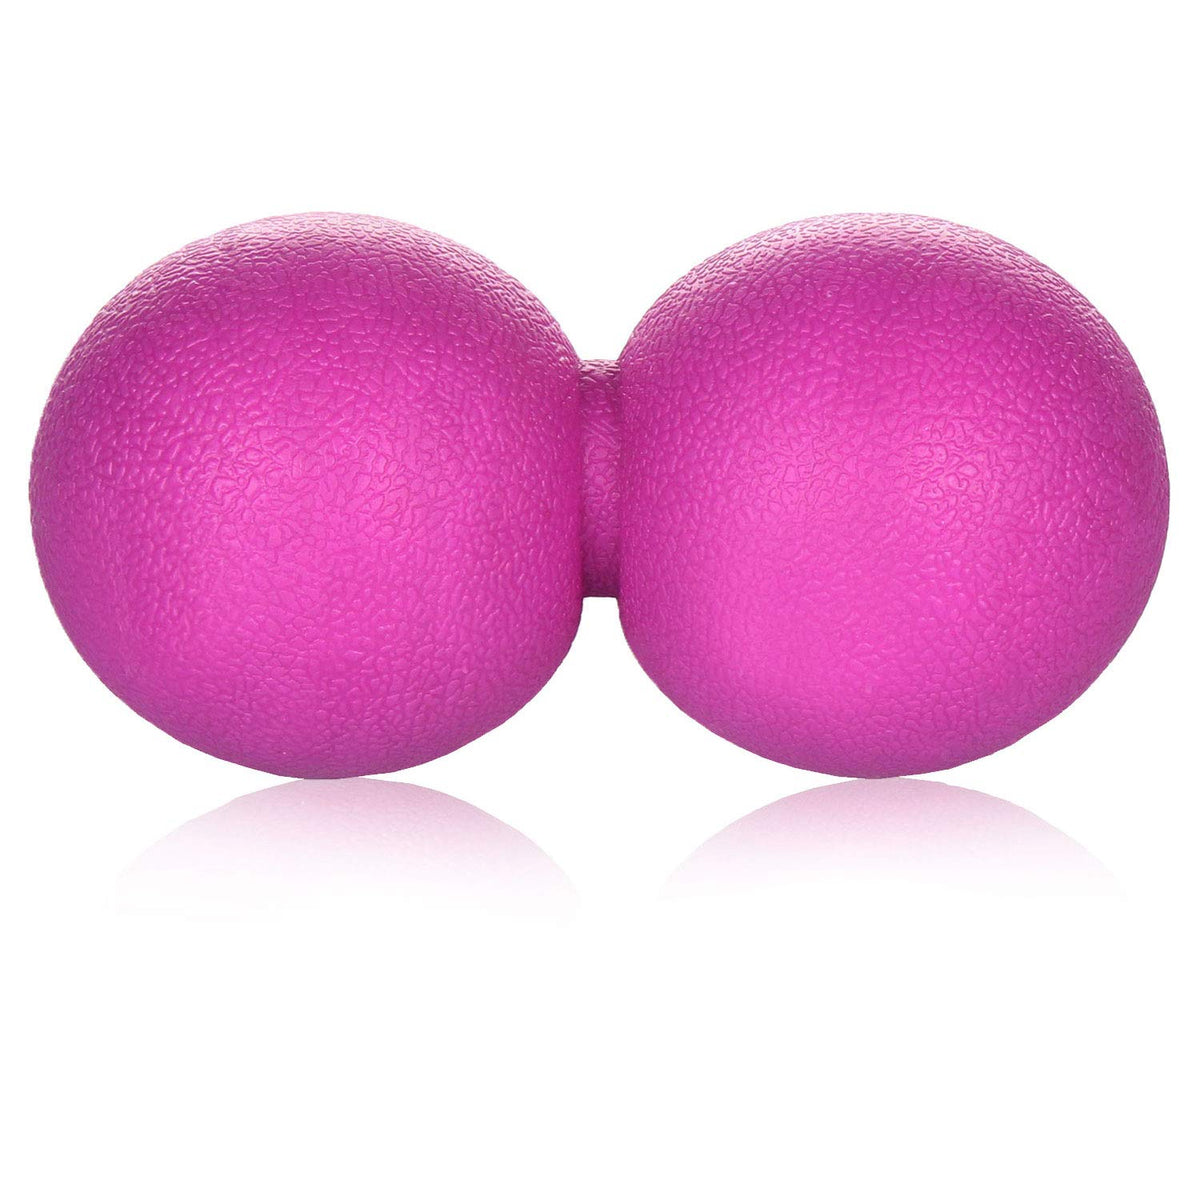 Strauss Yoga & Lacrosse Massage Dual Peanut Shaped Ball | Ideal for Physiotherapy, Deep Tissue Massage, Trigger Point Therapy, Muscle Knots | High-Density Roller & Acupressure Ball for Myofascial Release & Pain Relief, (Pink)